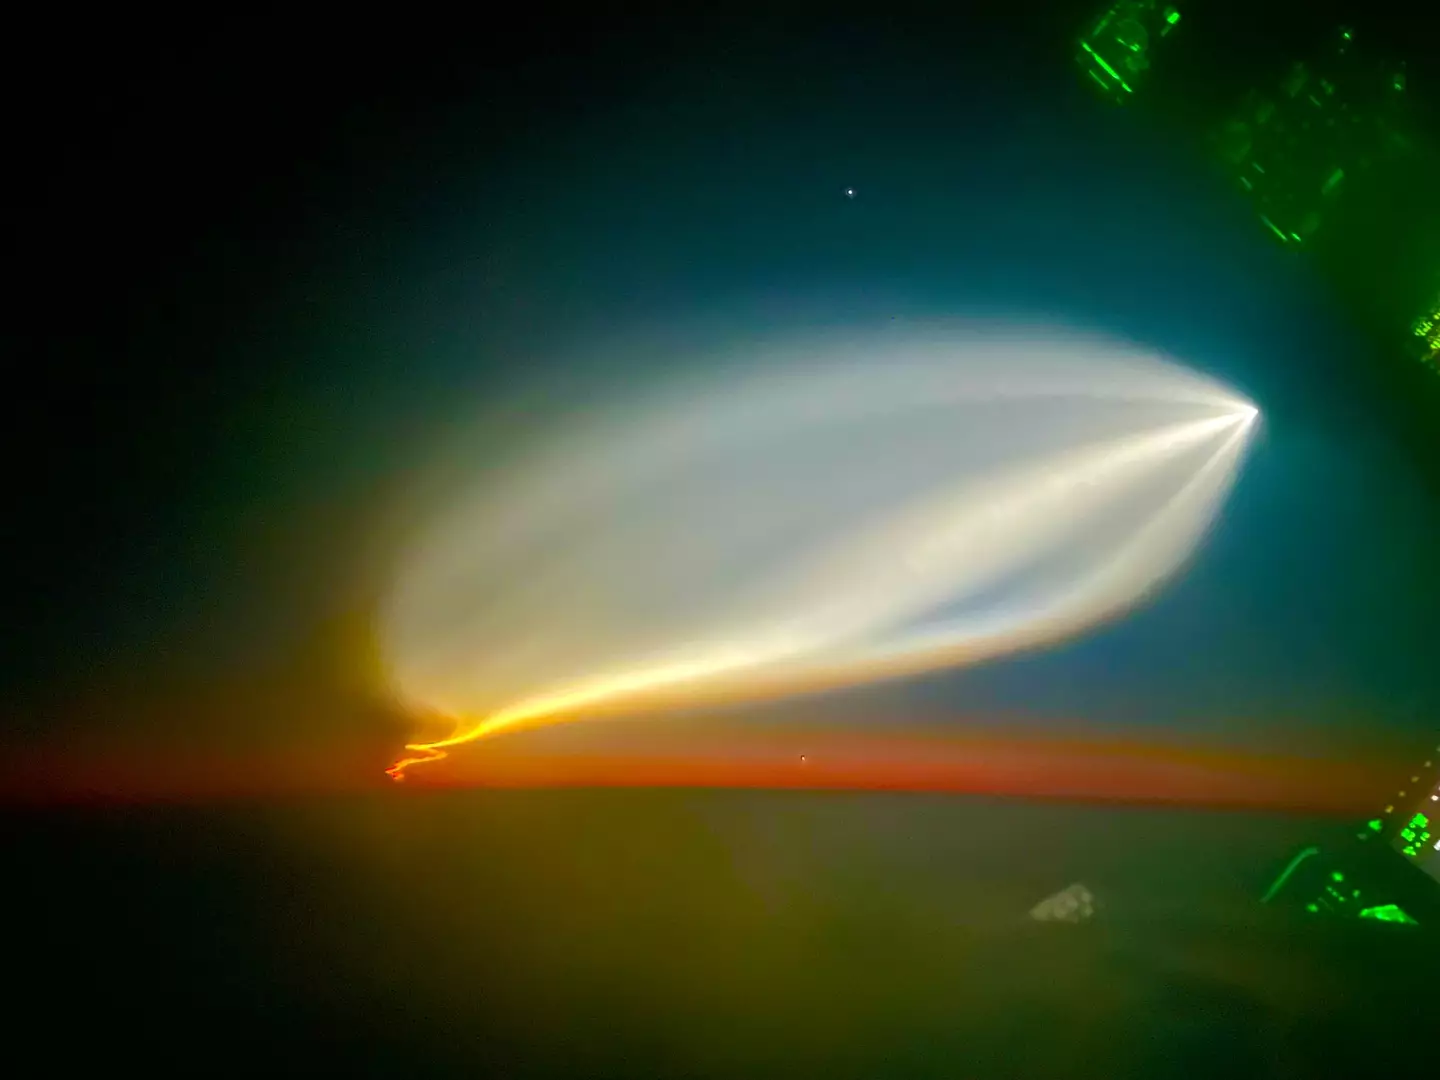 The light was identified as the SpaceX launch.